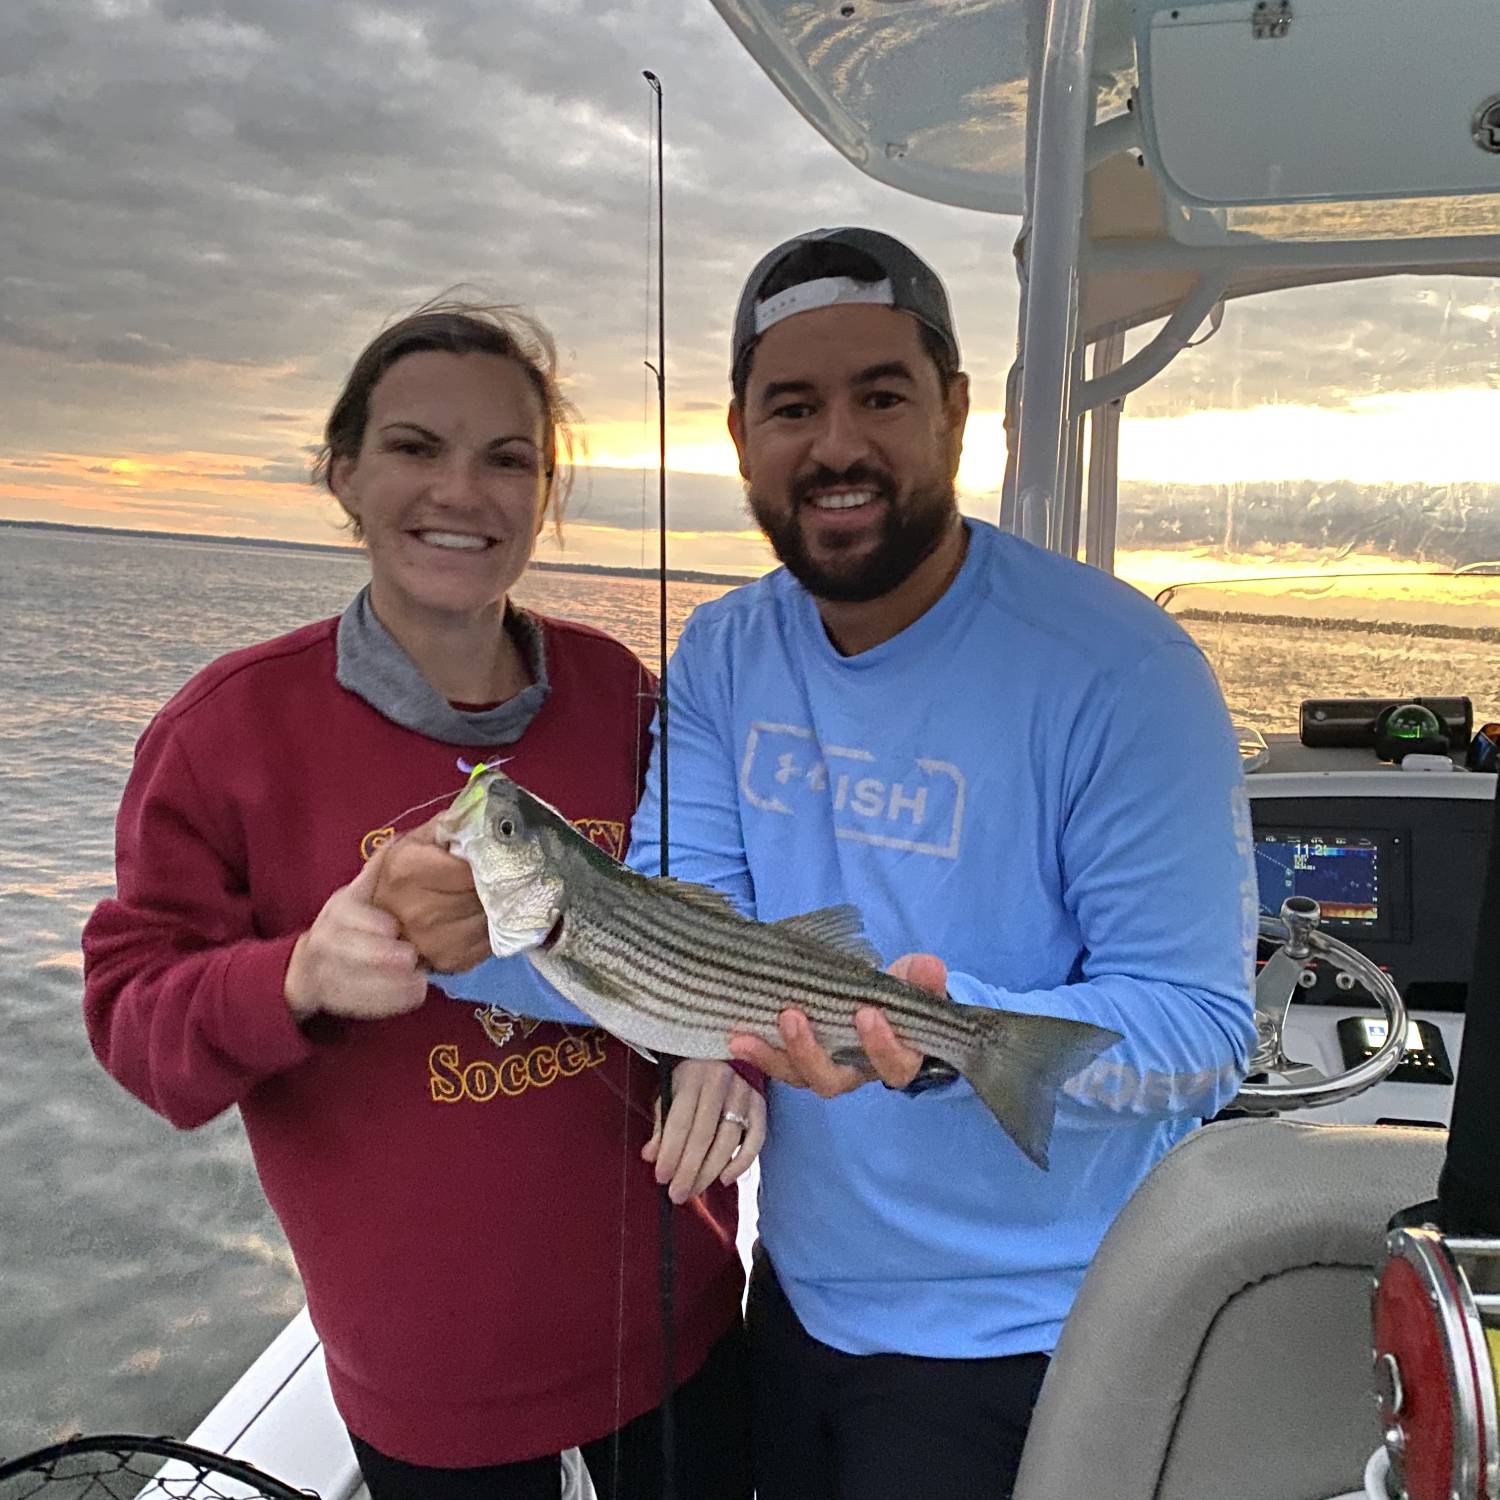 A week before our due date, I somehow convinced my wife to go fishing. She said yes so I had...